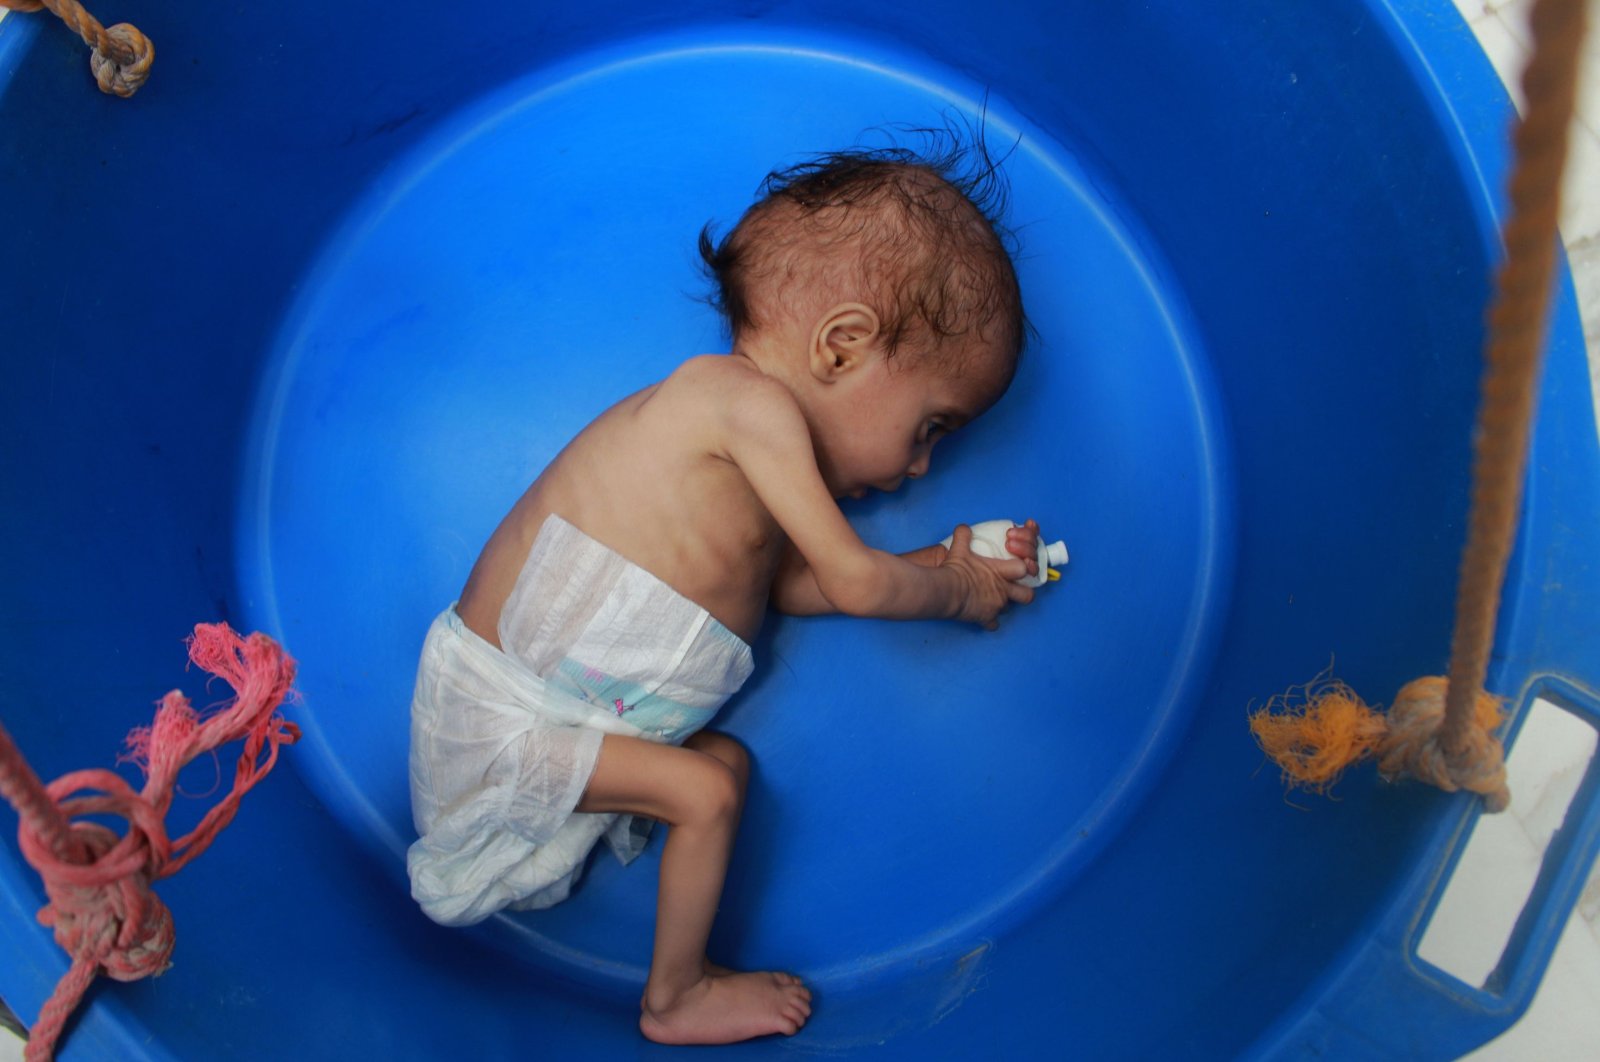 A Yemeni child suffering from malnutrition is weighed at a treatment center in Yemen's northern Hajjah province, July 5, 2020. (AFP Photo)